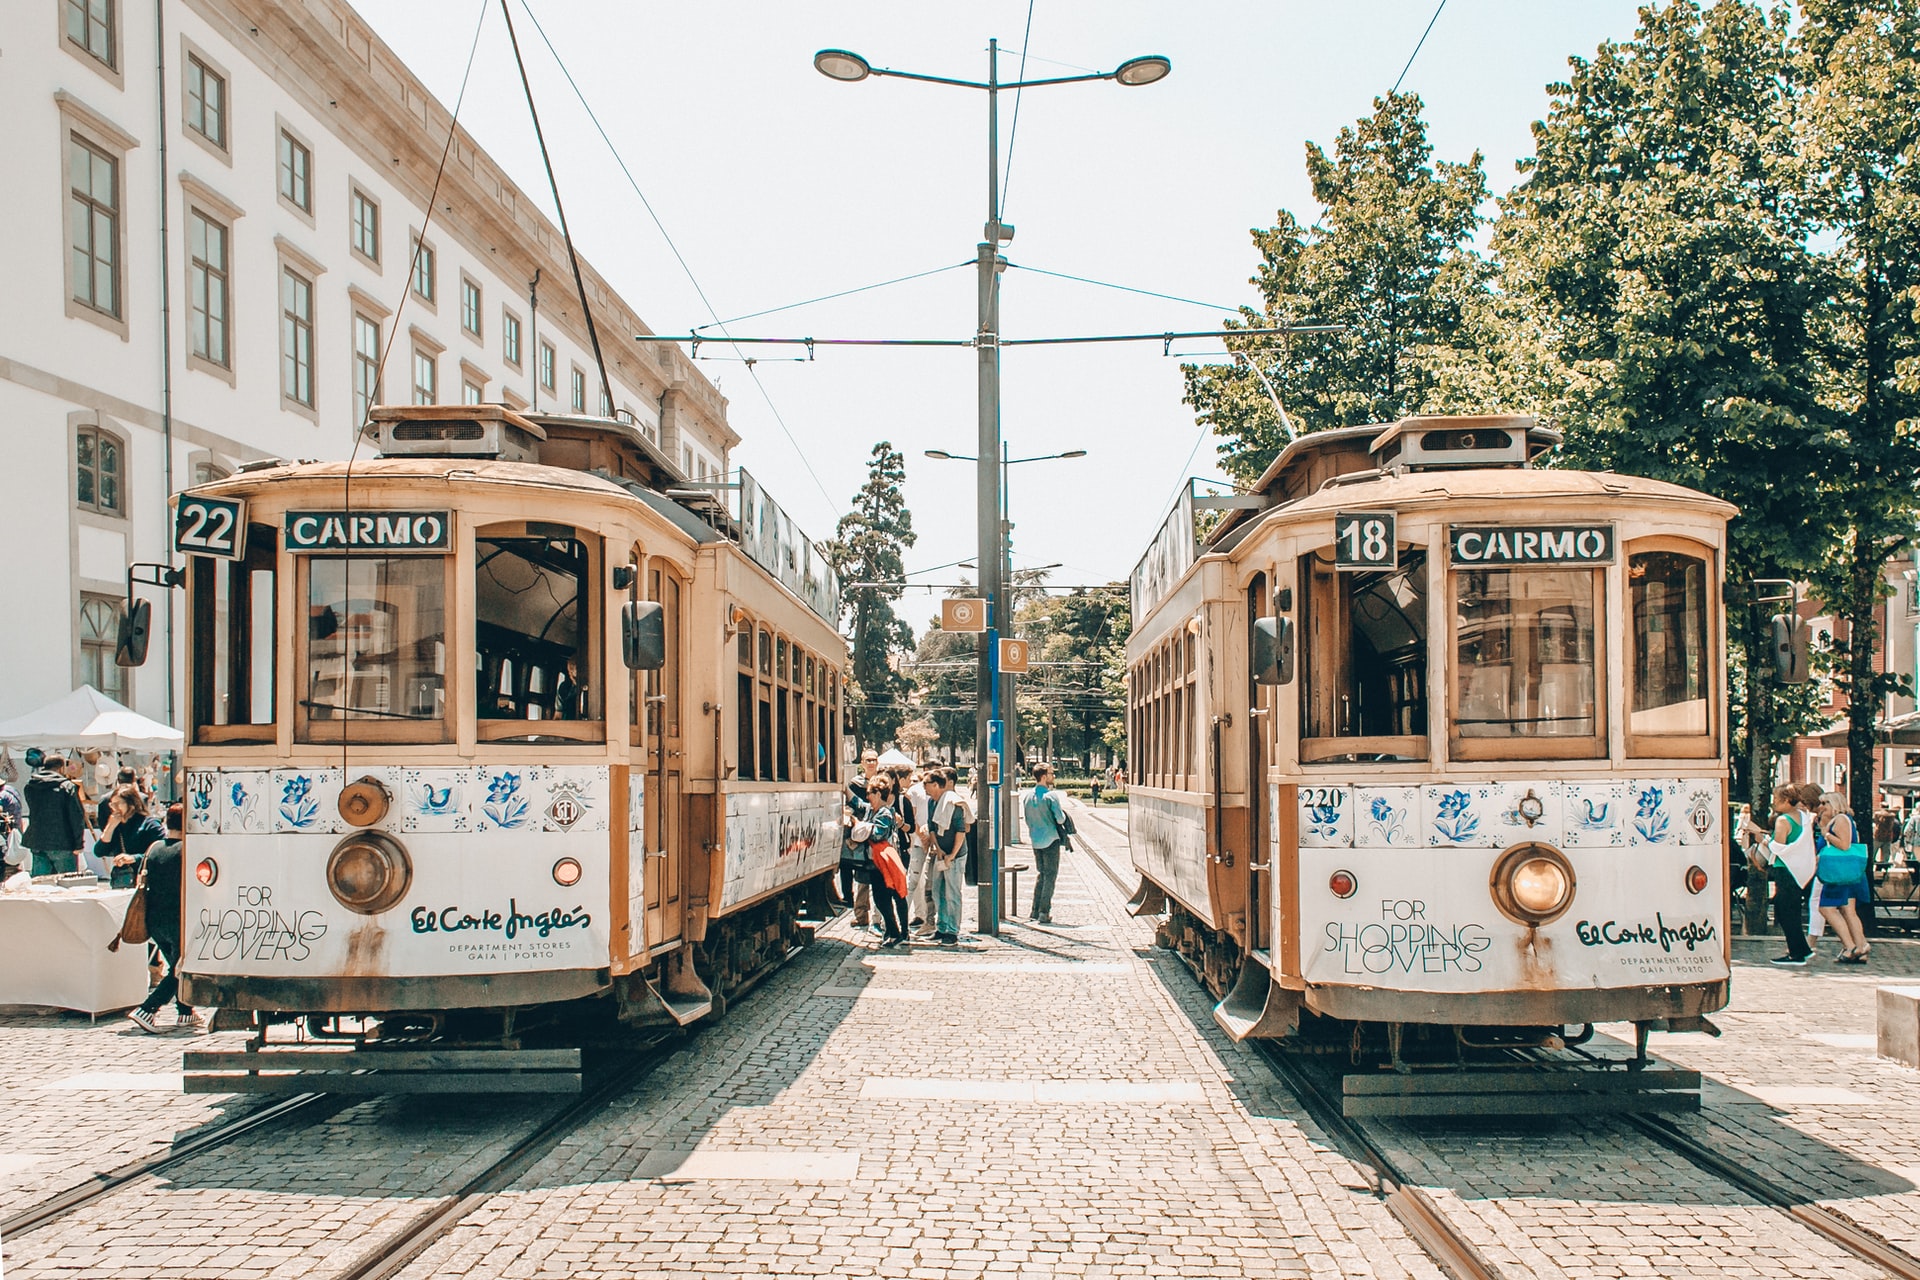 Porto trams 18 and 22